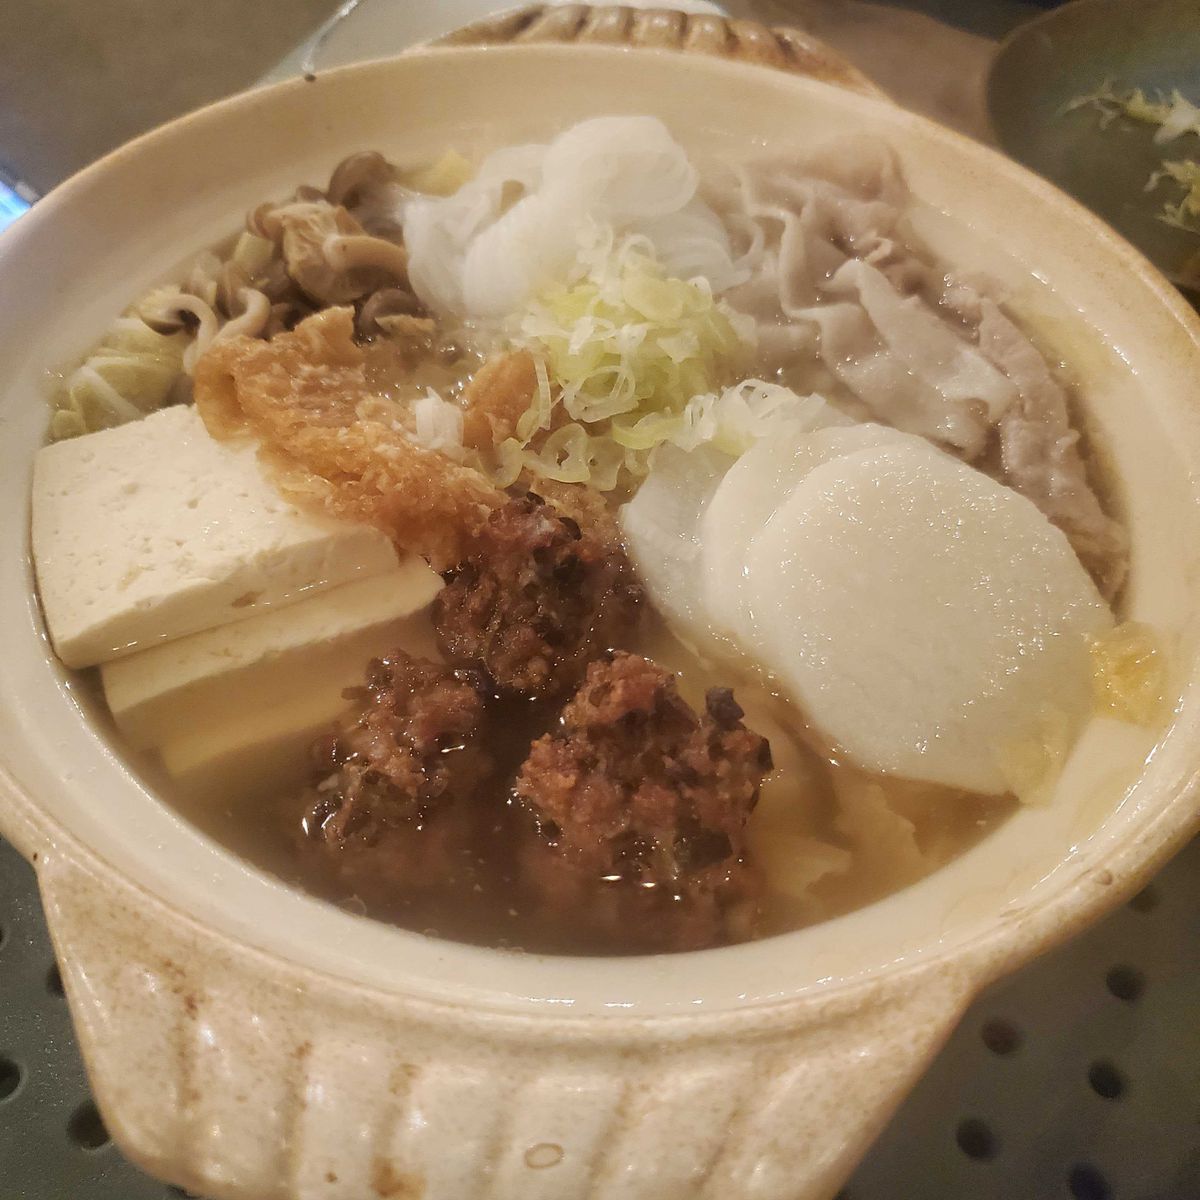 Hot pot with vegetables and broth at Emeryville’s Good to Eat Dumplings